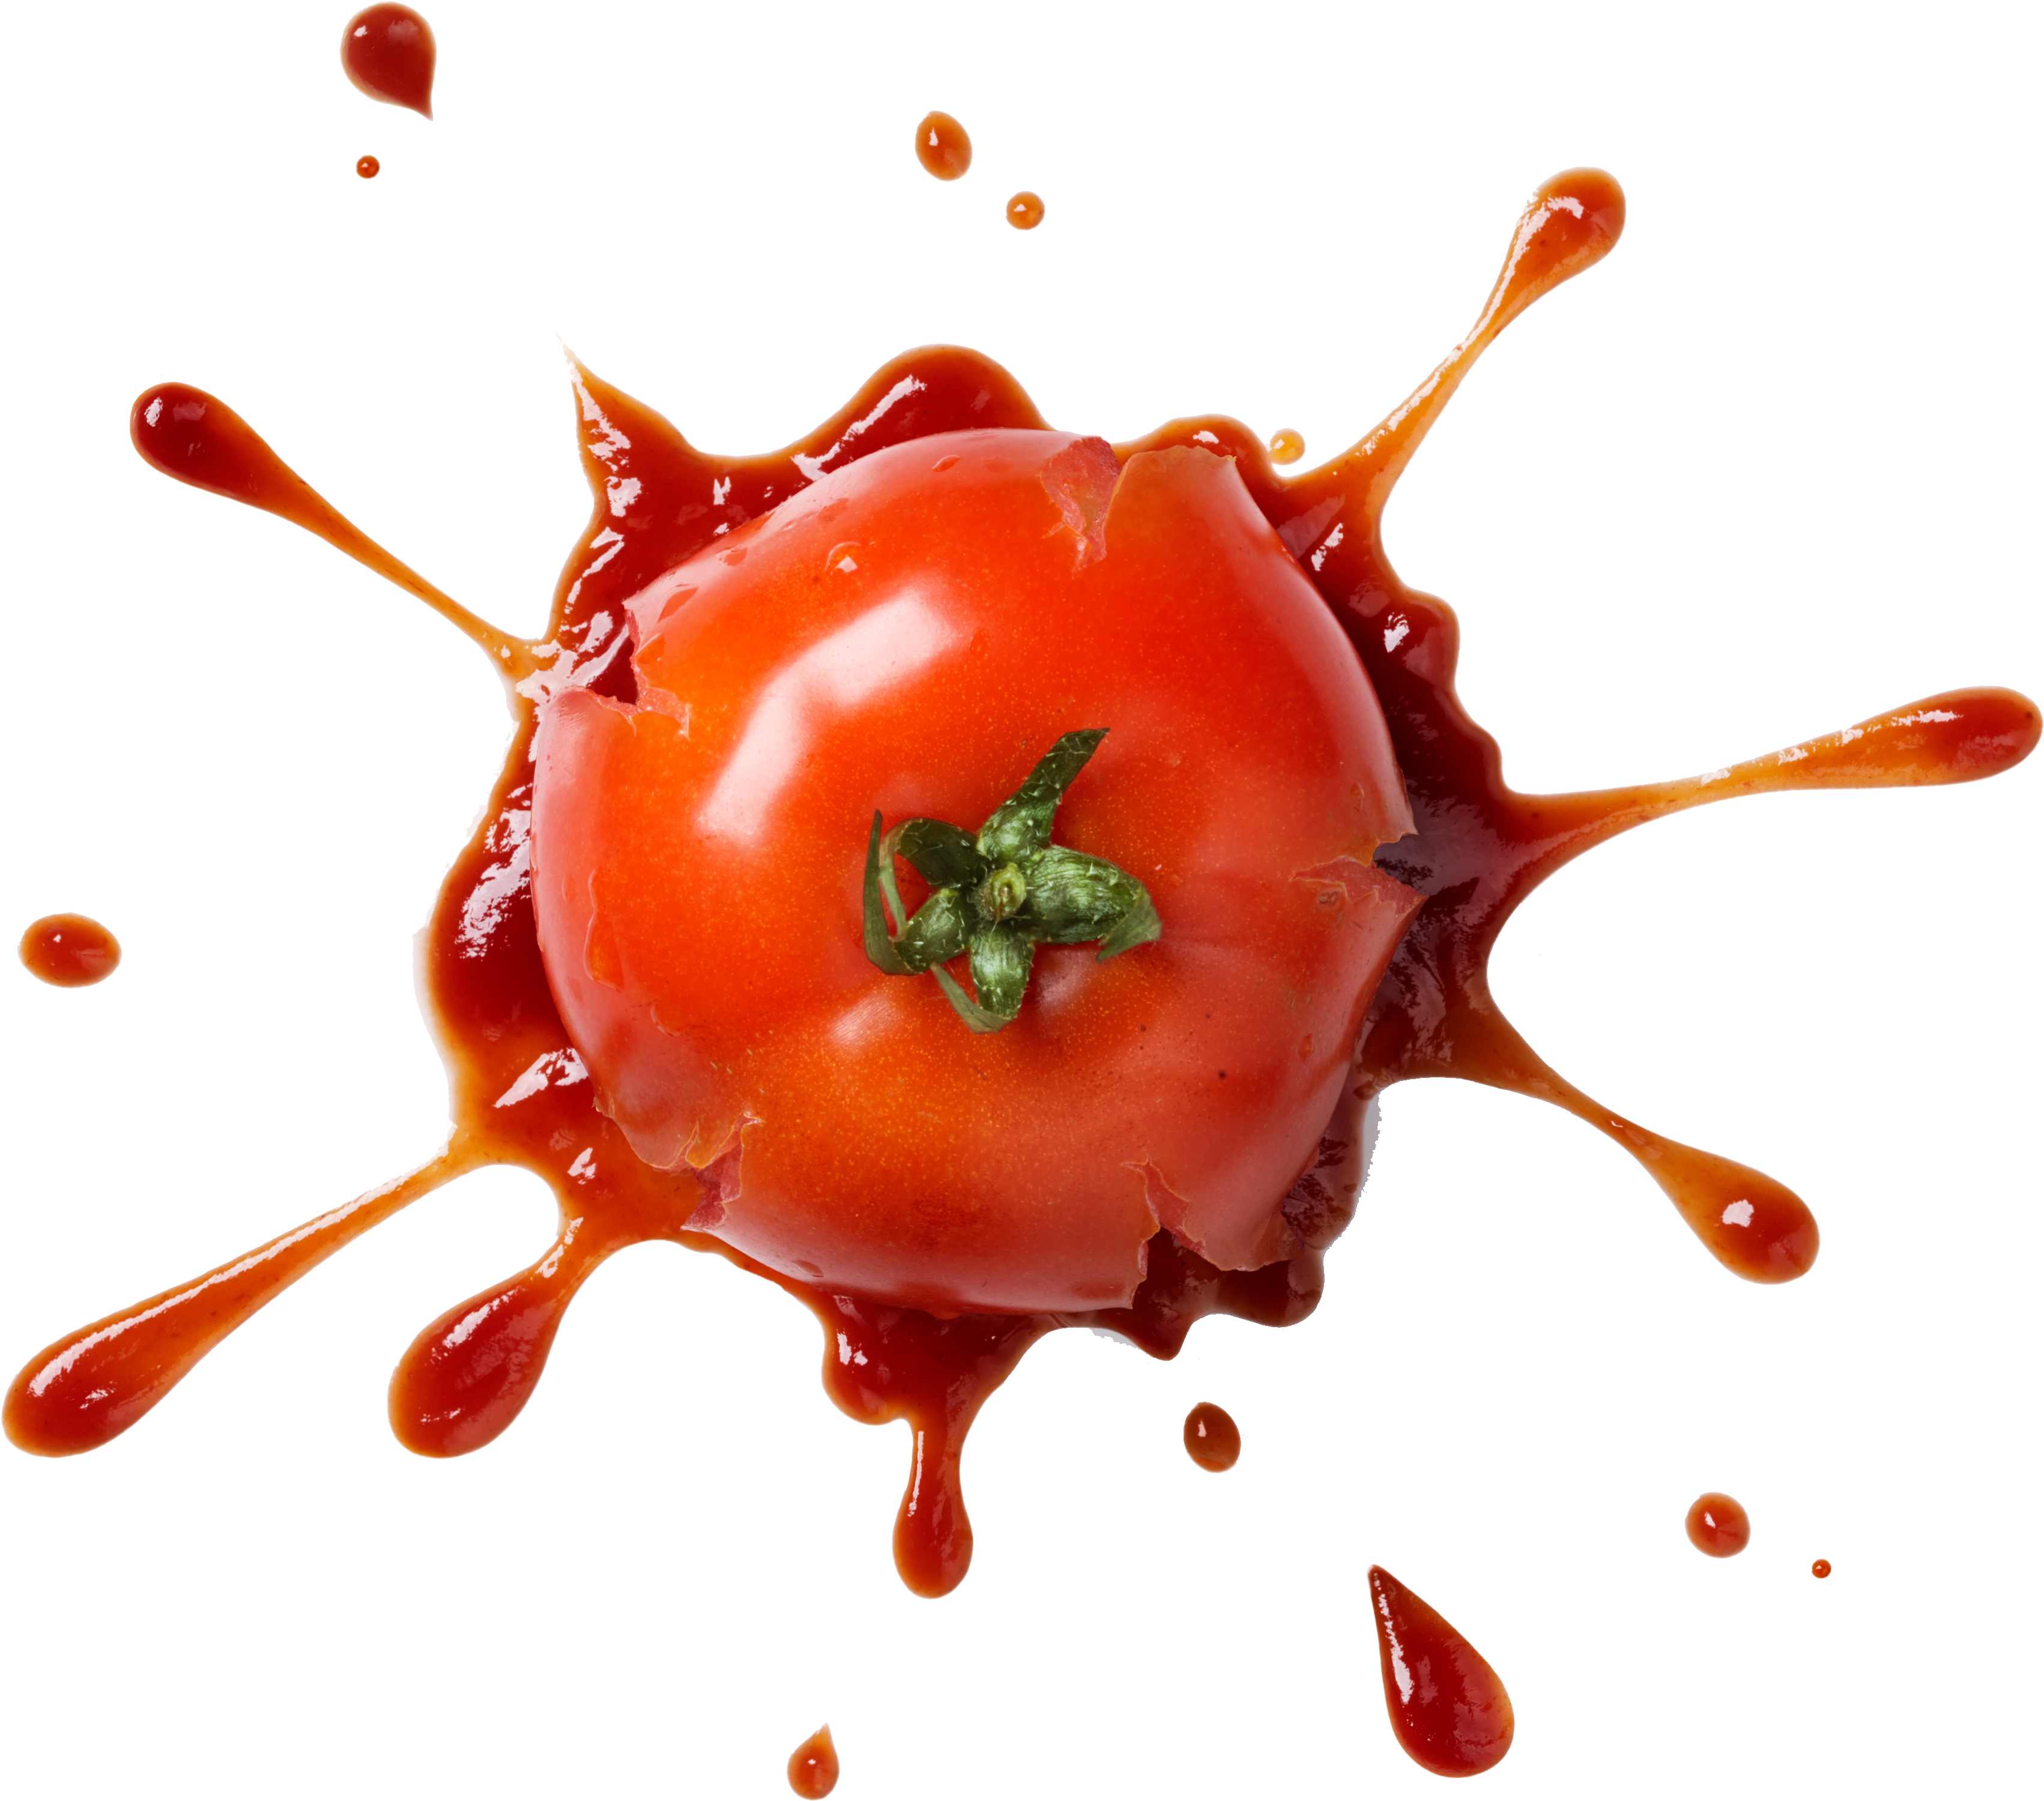 A Tomato With A Splattered Tomato